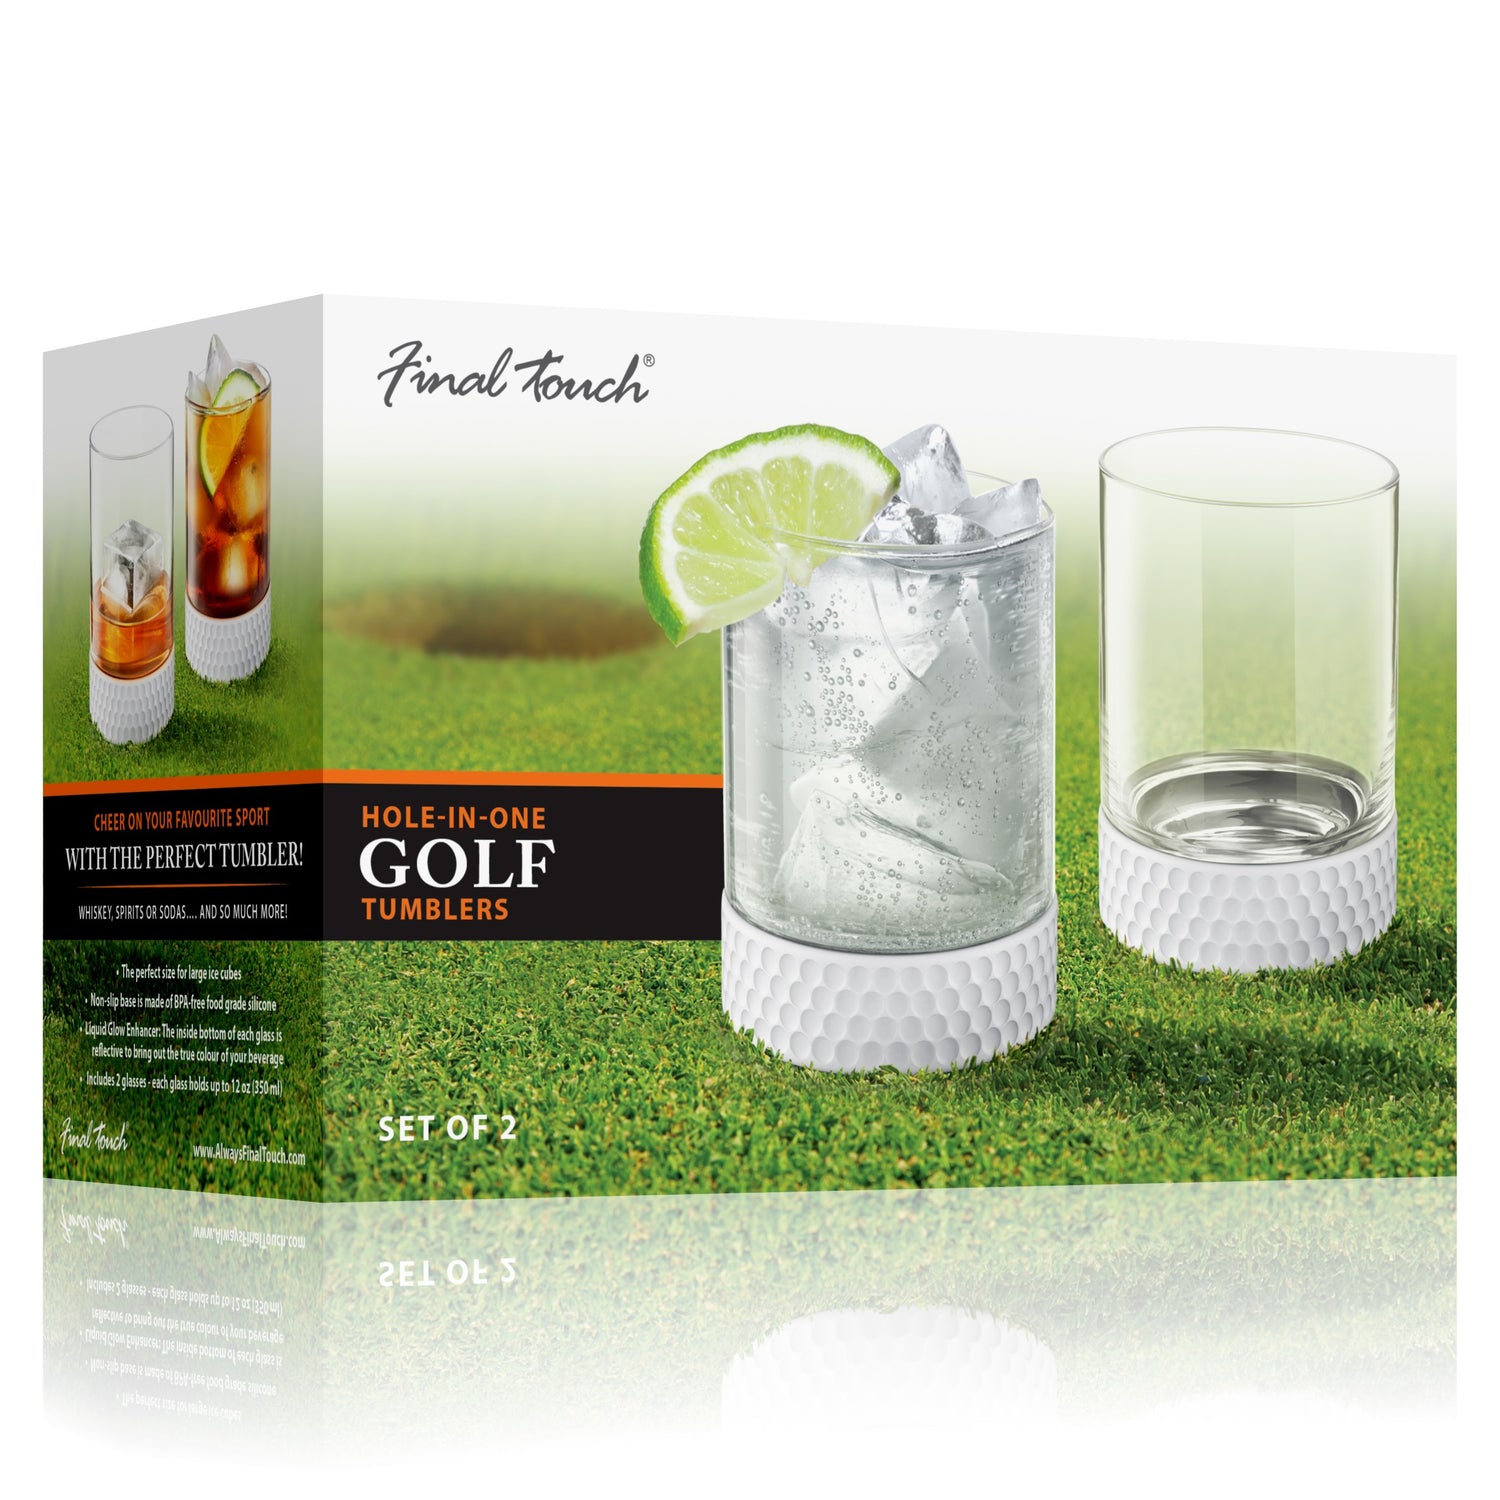 Hole-In-One Golf Tumblers - Set of 2